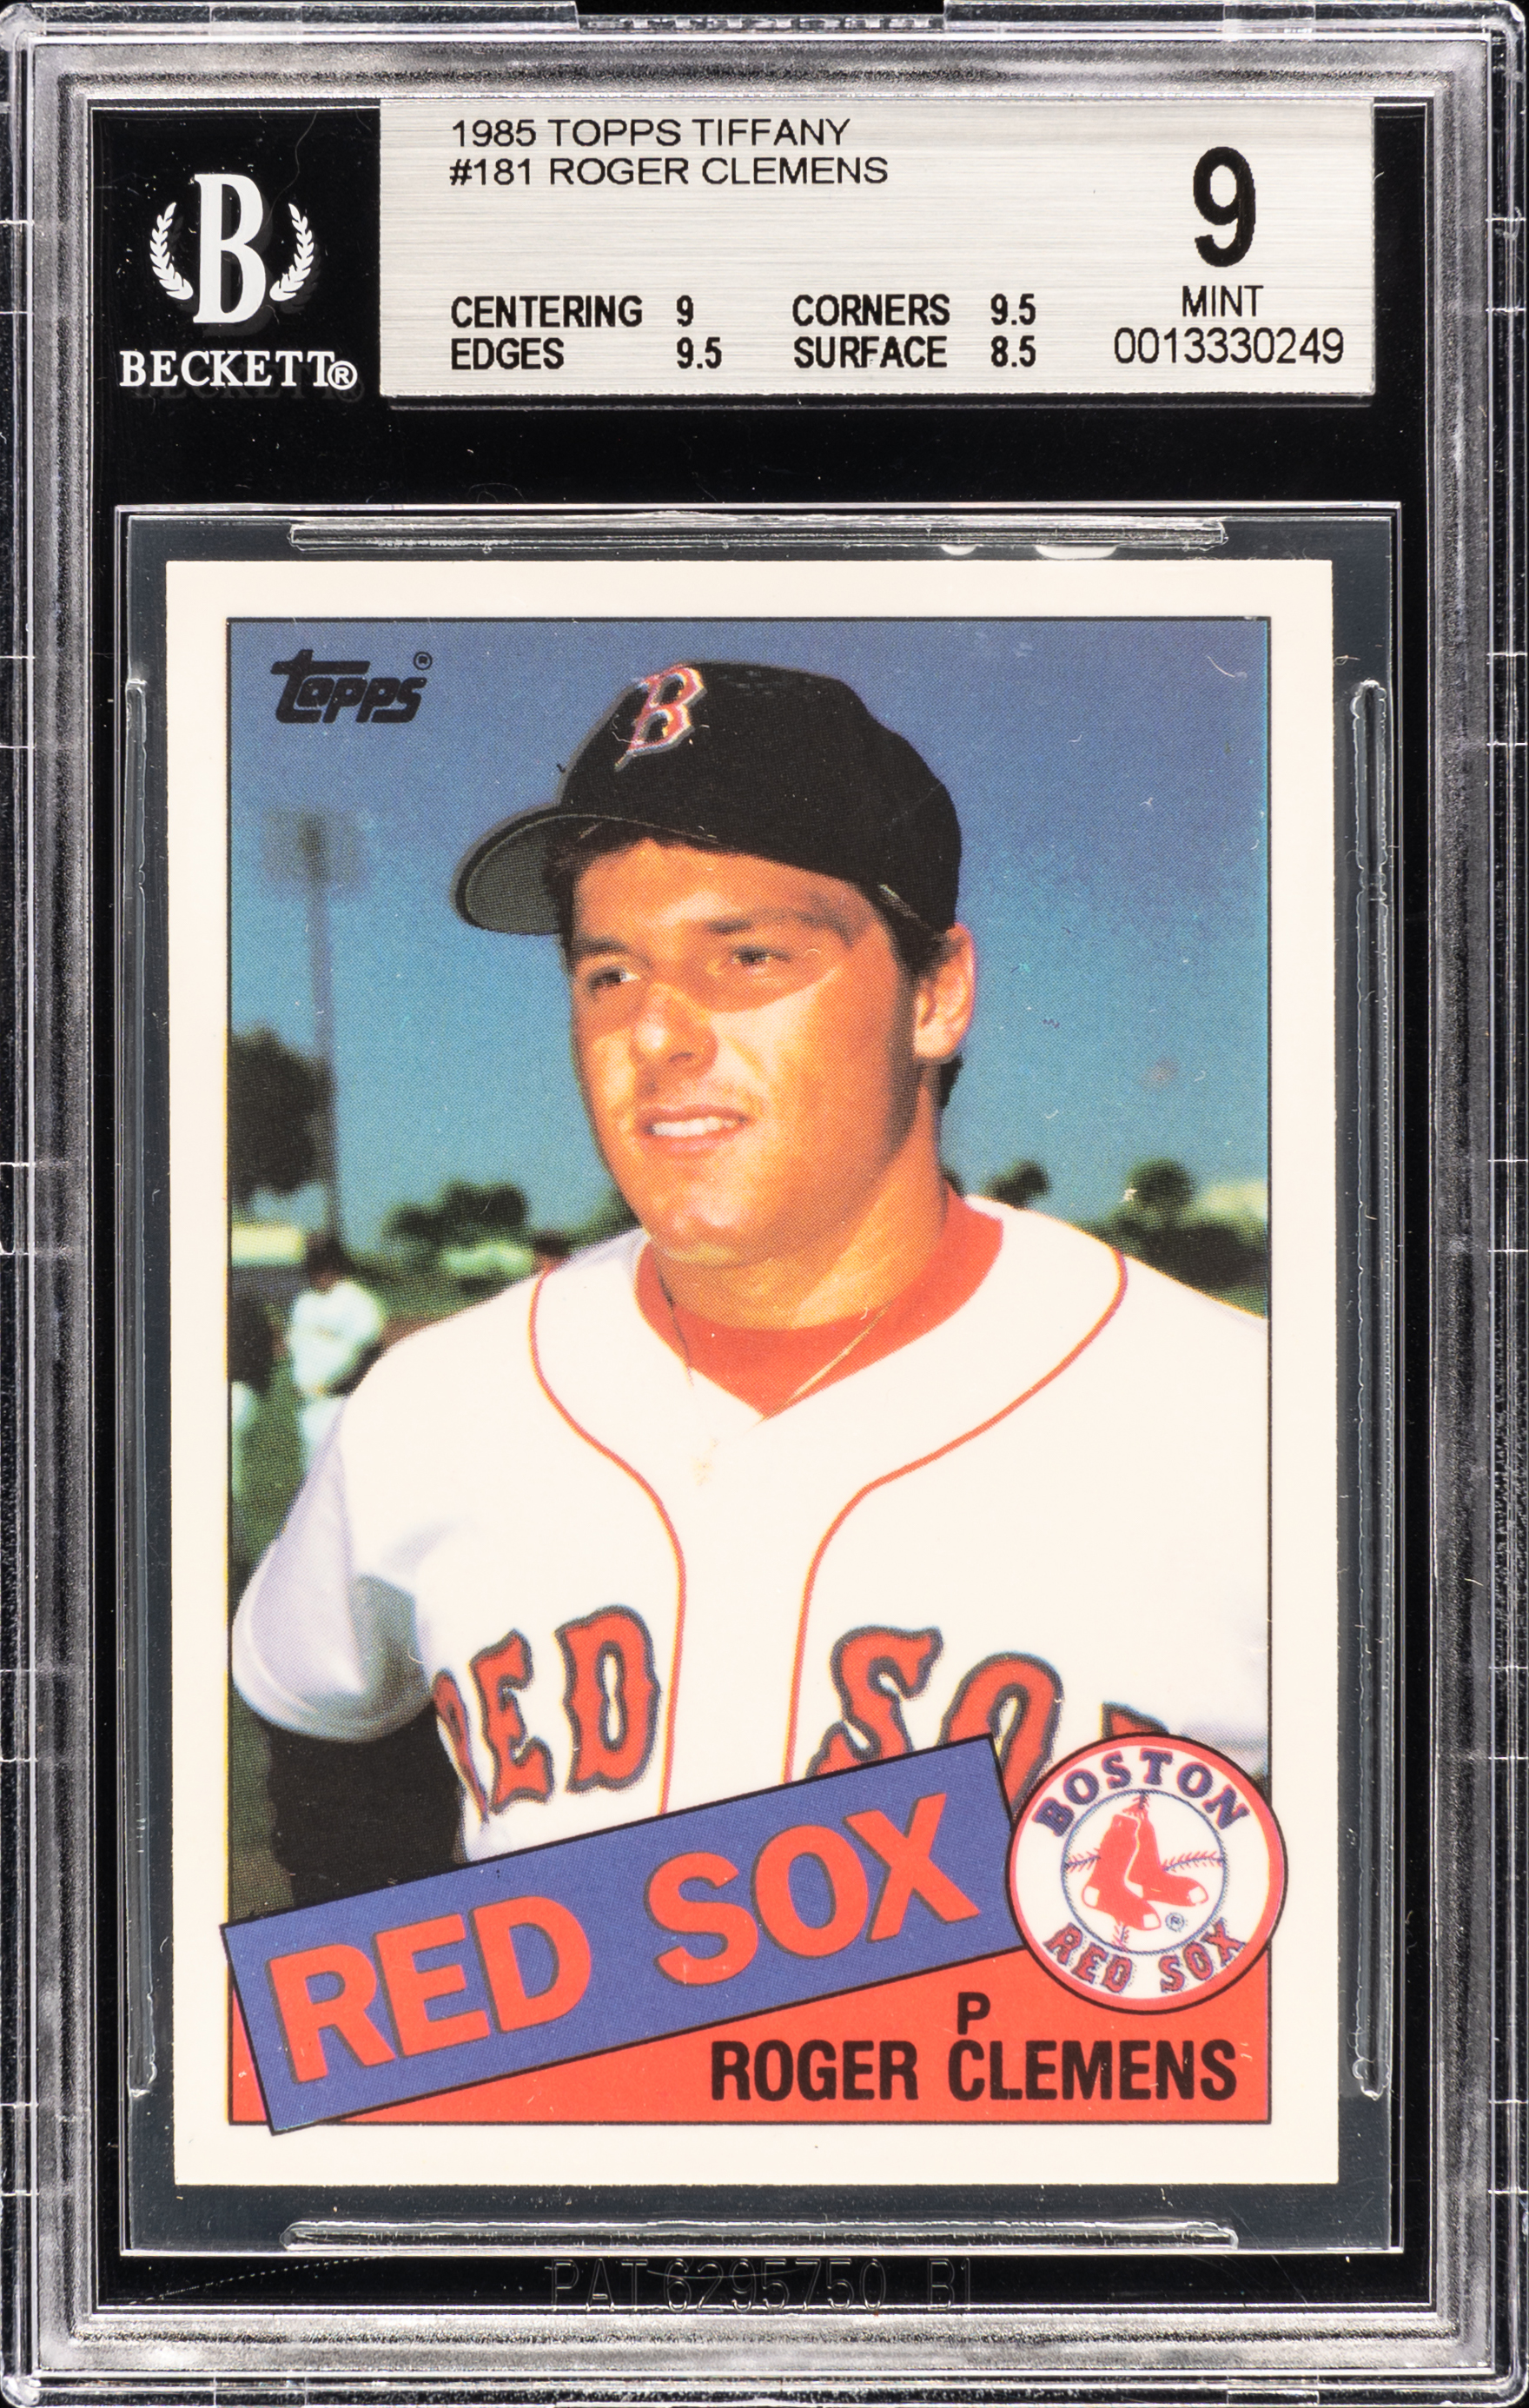 1985 Topps Tiffany 181 Roger Clemens – BGS MINT 9